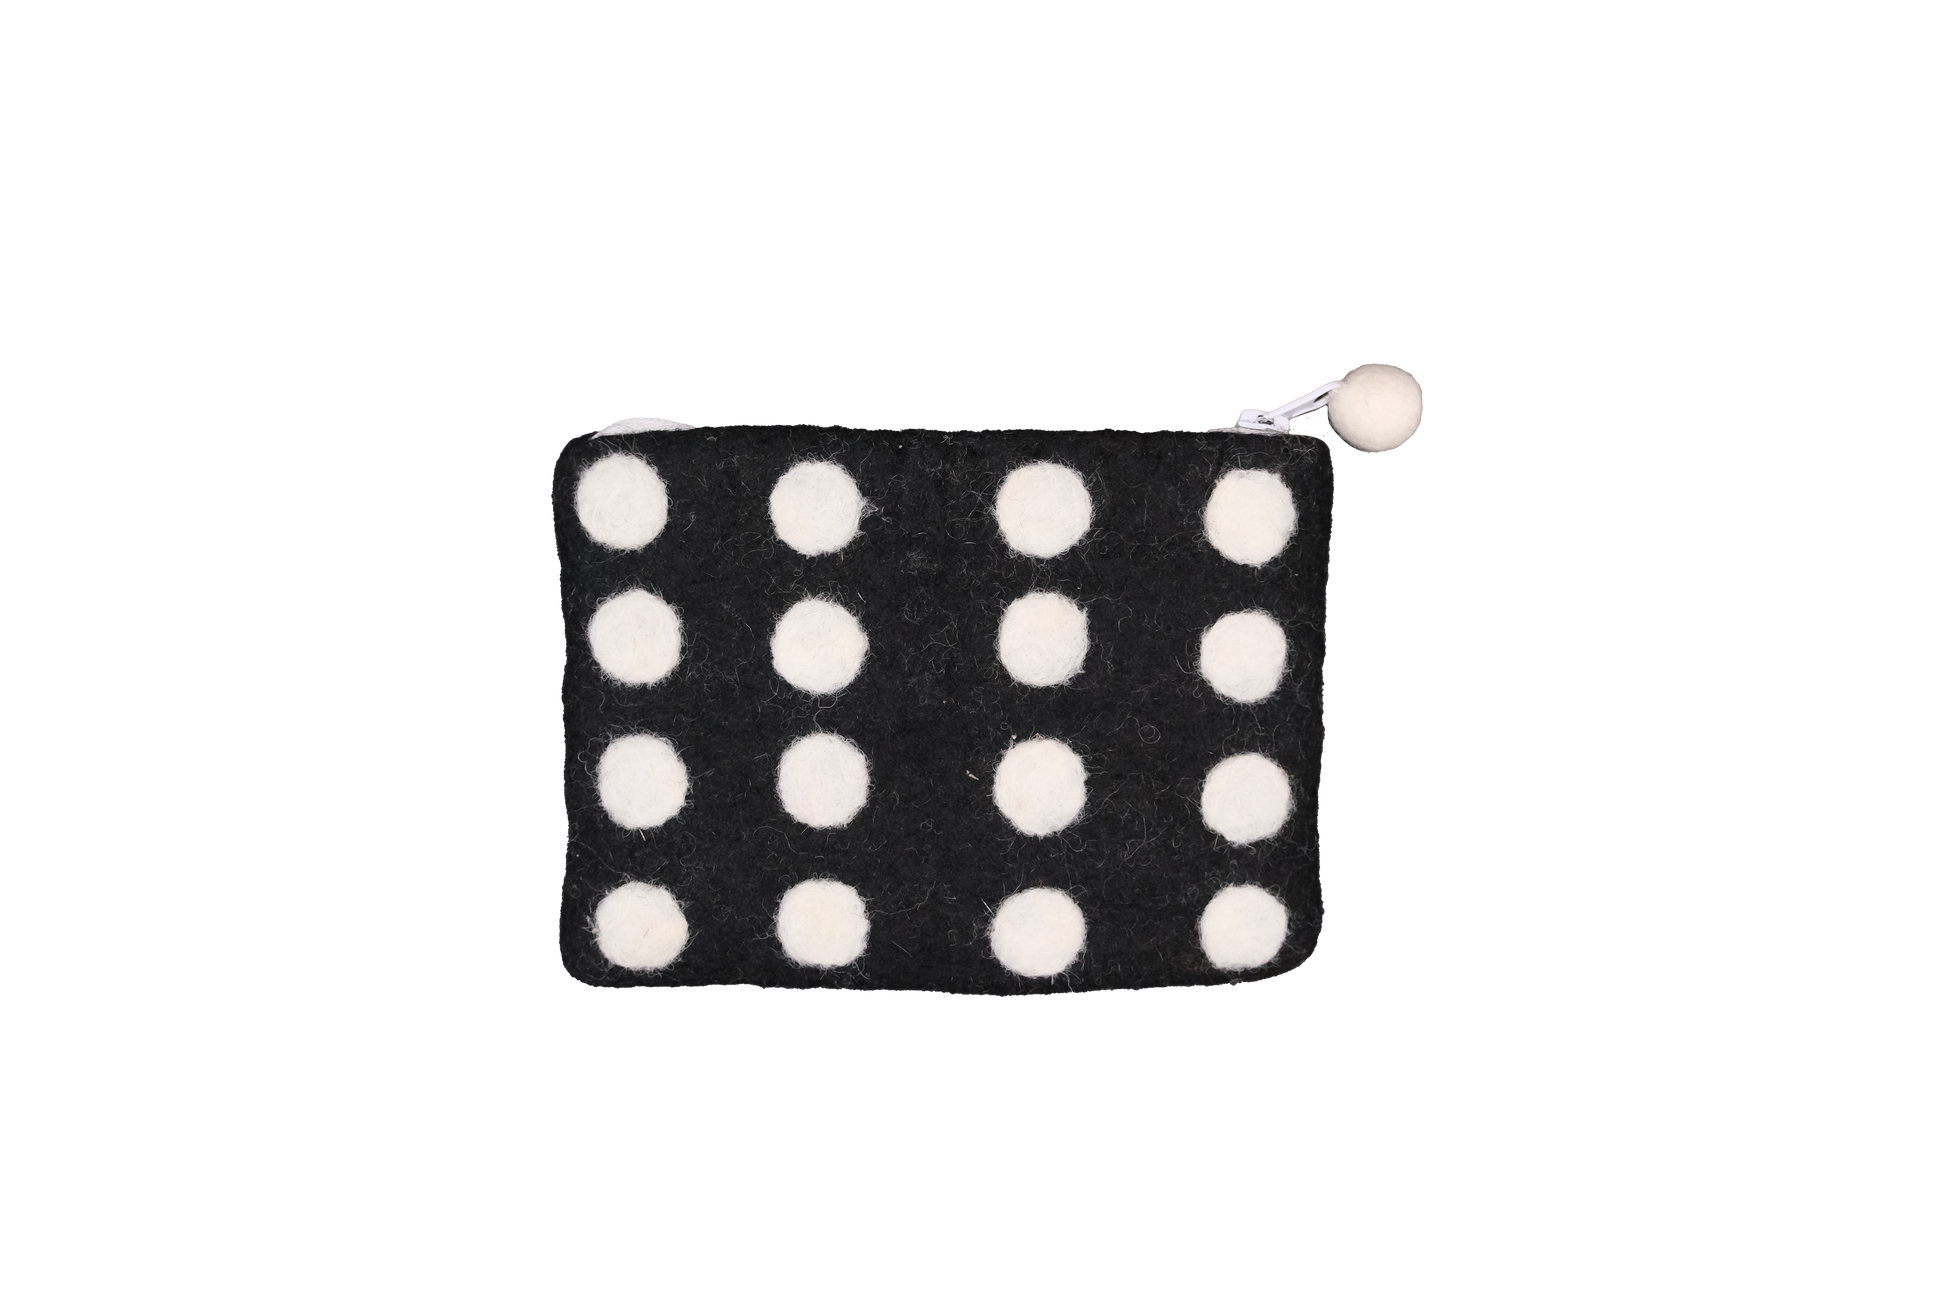 This Global Groove Life, handmade, ethical, fair trade, eco-friendly, sustainable, black & white domino colored, New Zealand wool zipper coin purse was created by artisans in Kathmandu Nepal and is adorned with a polka dot motif and a pom pom zipper pull.